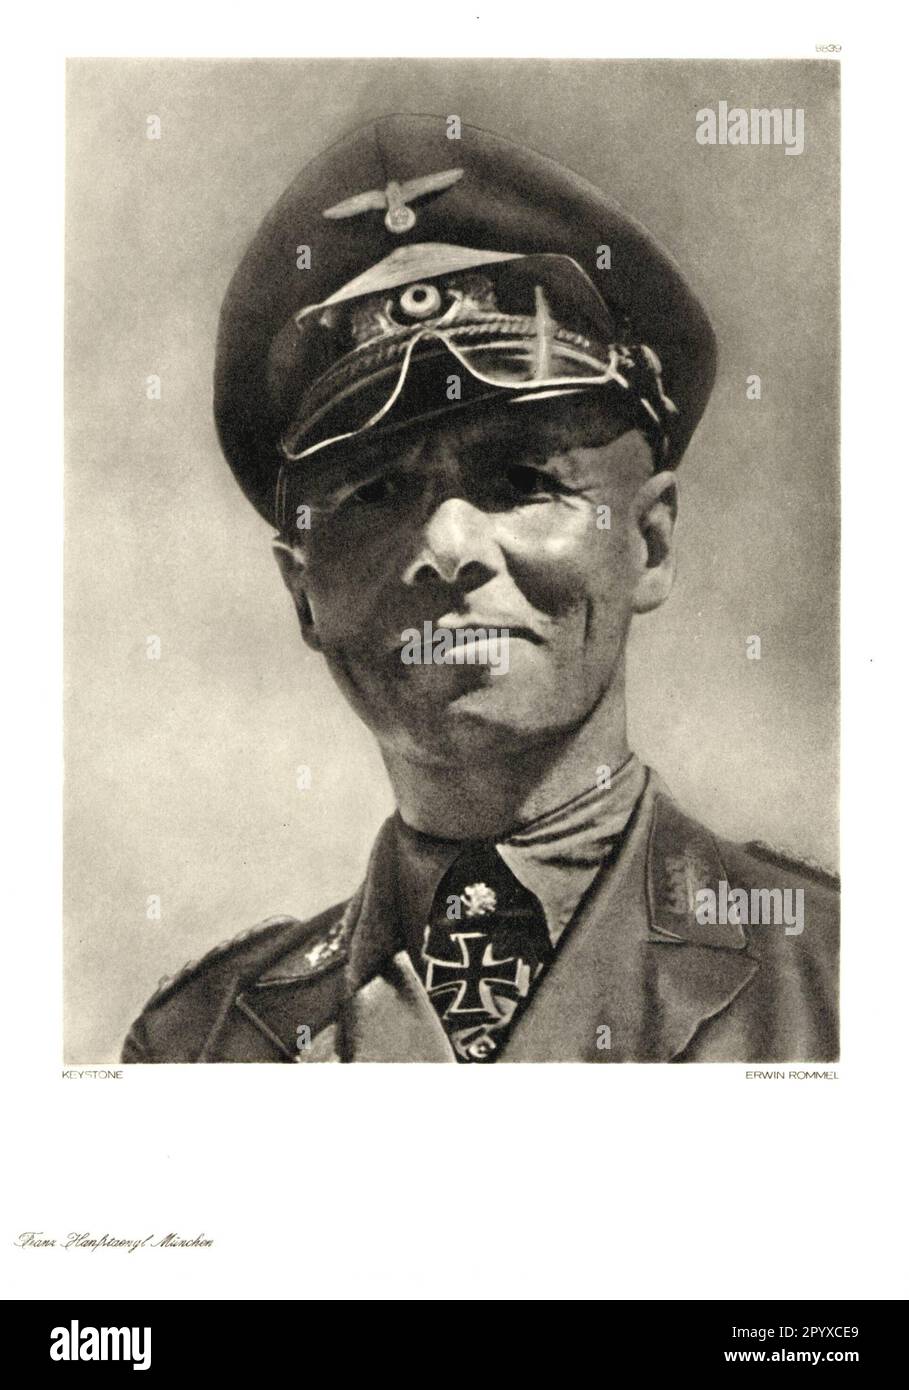 Erwin Rommel (1891-1944), commander-in-chief of the German Afrika Korps (1941-43) and field marshal general since 1942. The image shows Rommel in the uniform of the Afrika Korps. Photo: Heliogravure, Corpus Imaginum, Hanfstaengl Collection. [automated translation] Stock Photo